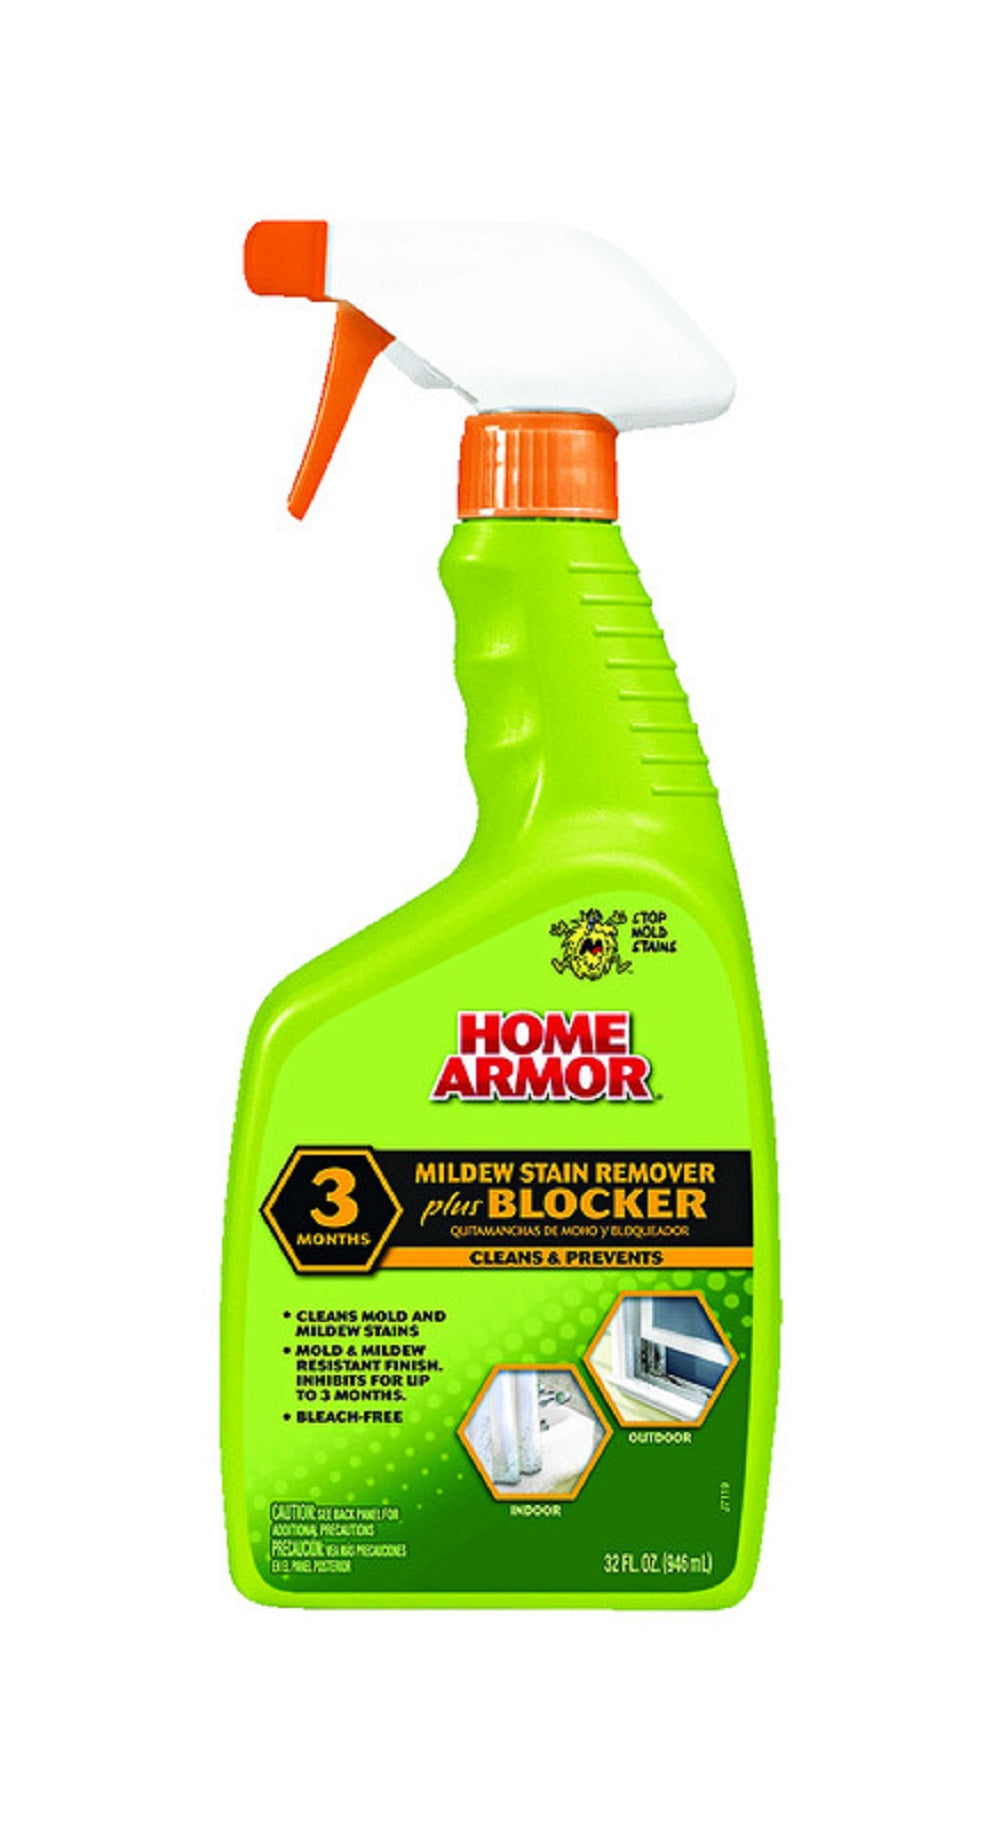 Home Armor FG523 Mold and Mildew Stain Remover, 32 Oz